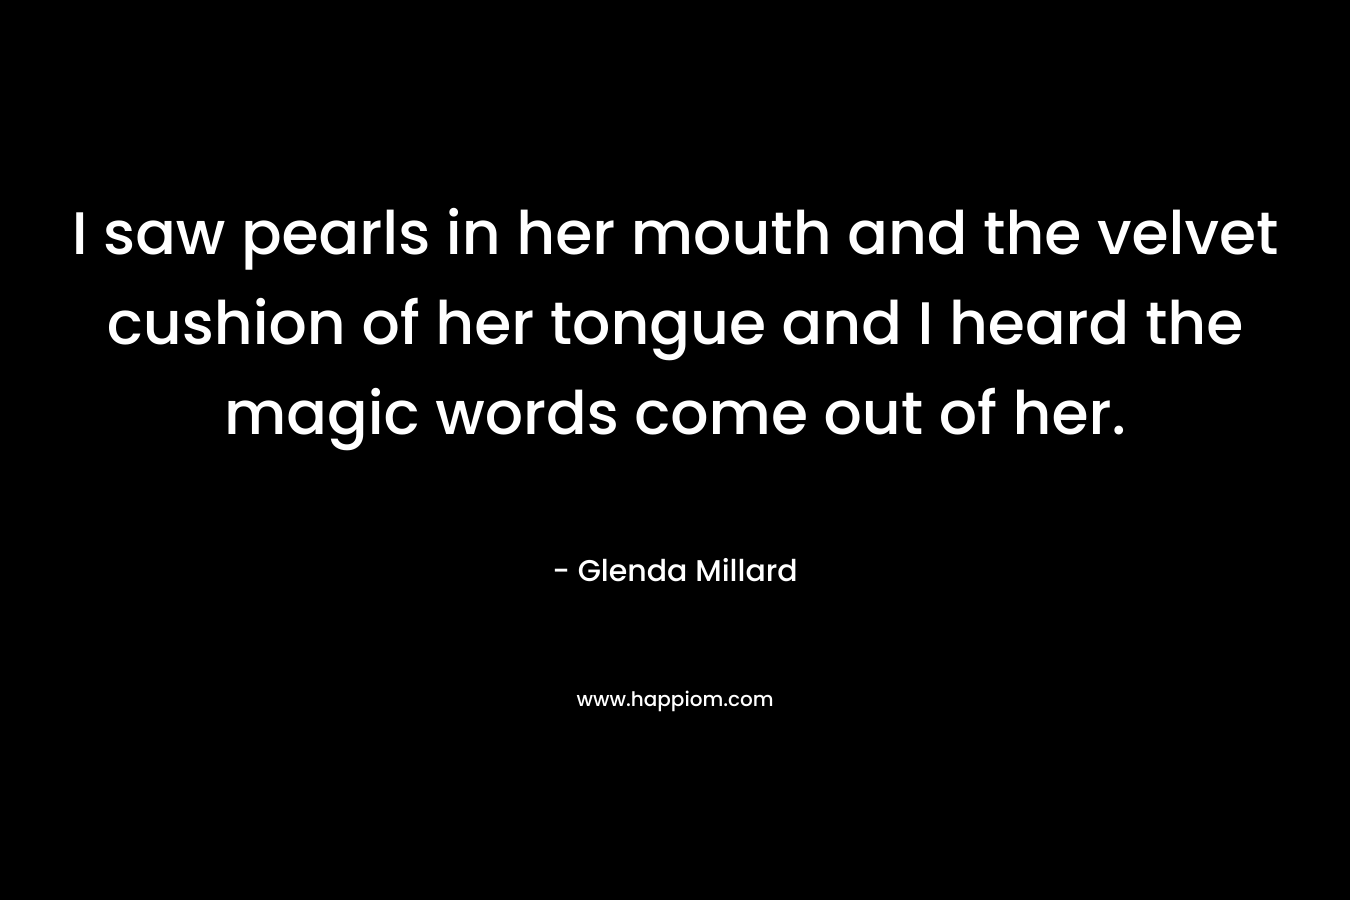 I saw pearls in her mouth and the velvet cushion of her tongue and I heard the magic words come out of her. – Glenda Millard